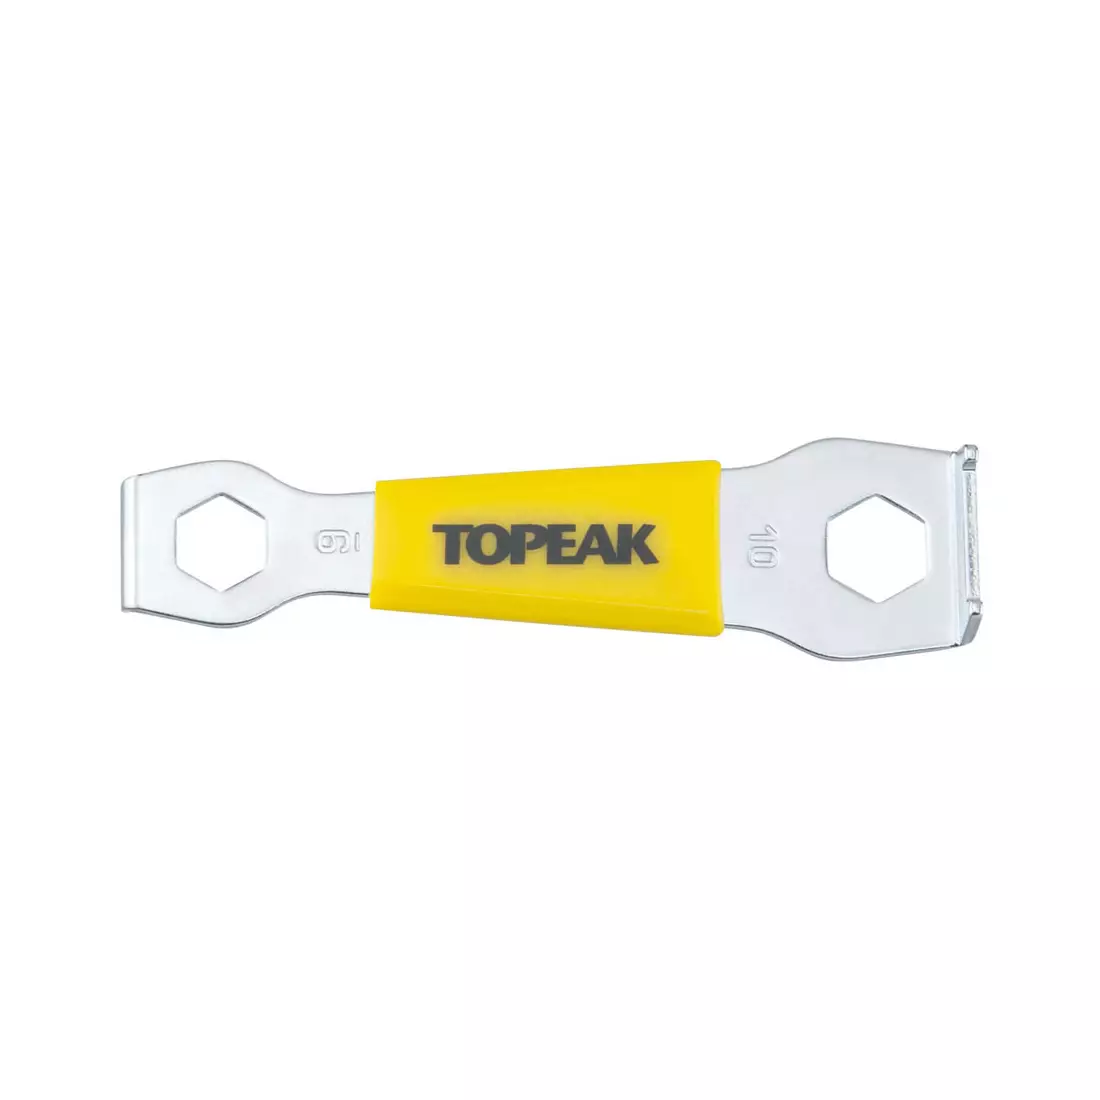 TOPEAK PREPSTATION Service tool: CHAINRING NUT WRENCH T-TPS-SP11